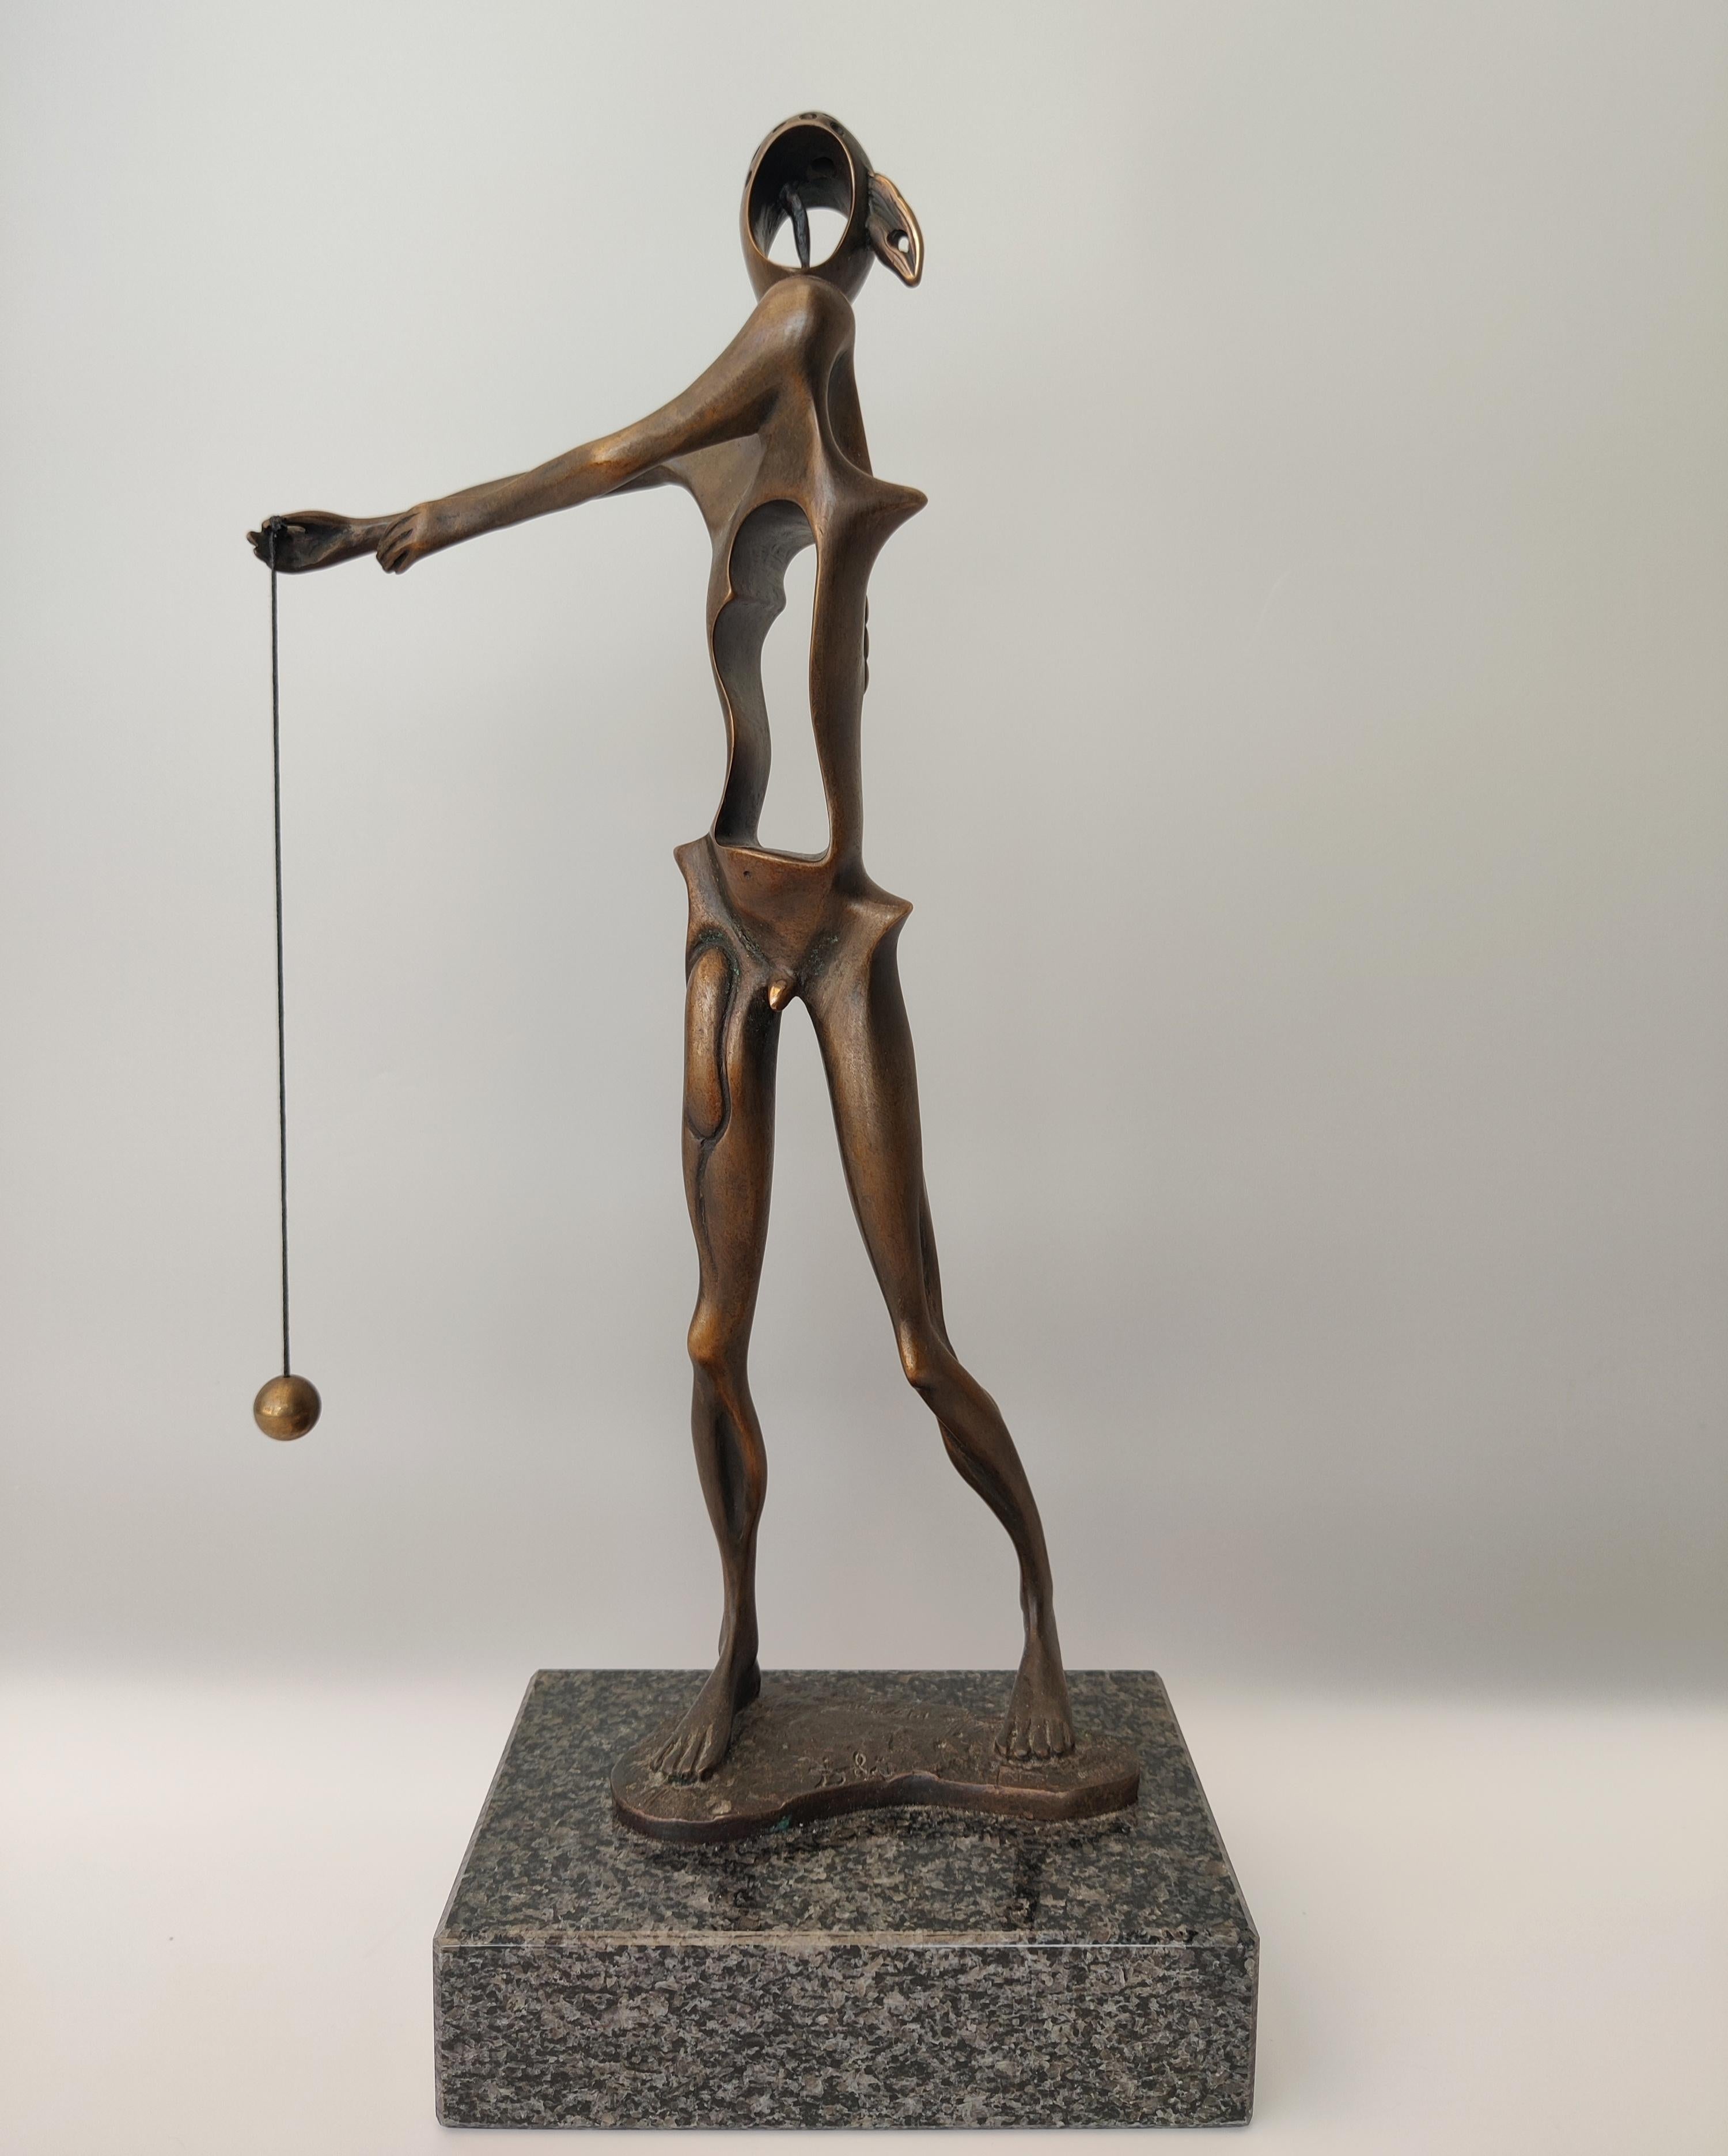 Salvador Dalí­ 
Homage to Newton
Size: 35 x 16 x 11 cm
Edition 197/350 patina brown
Date conceived: 1980
First cast: 1980
Date cast: 2010
Material: bronze
Foundry: Perseo, Switzerland
COA from the foundry

This sculpture 'Homage to Newton' was cast